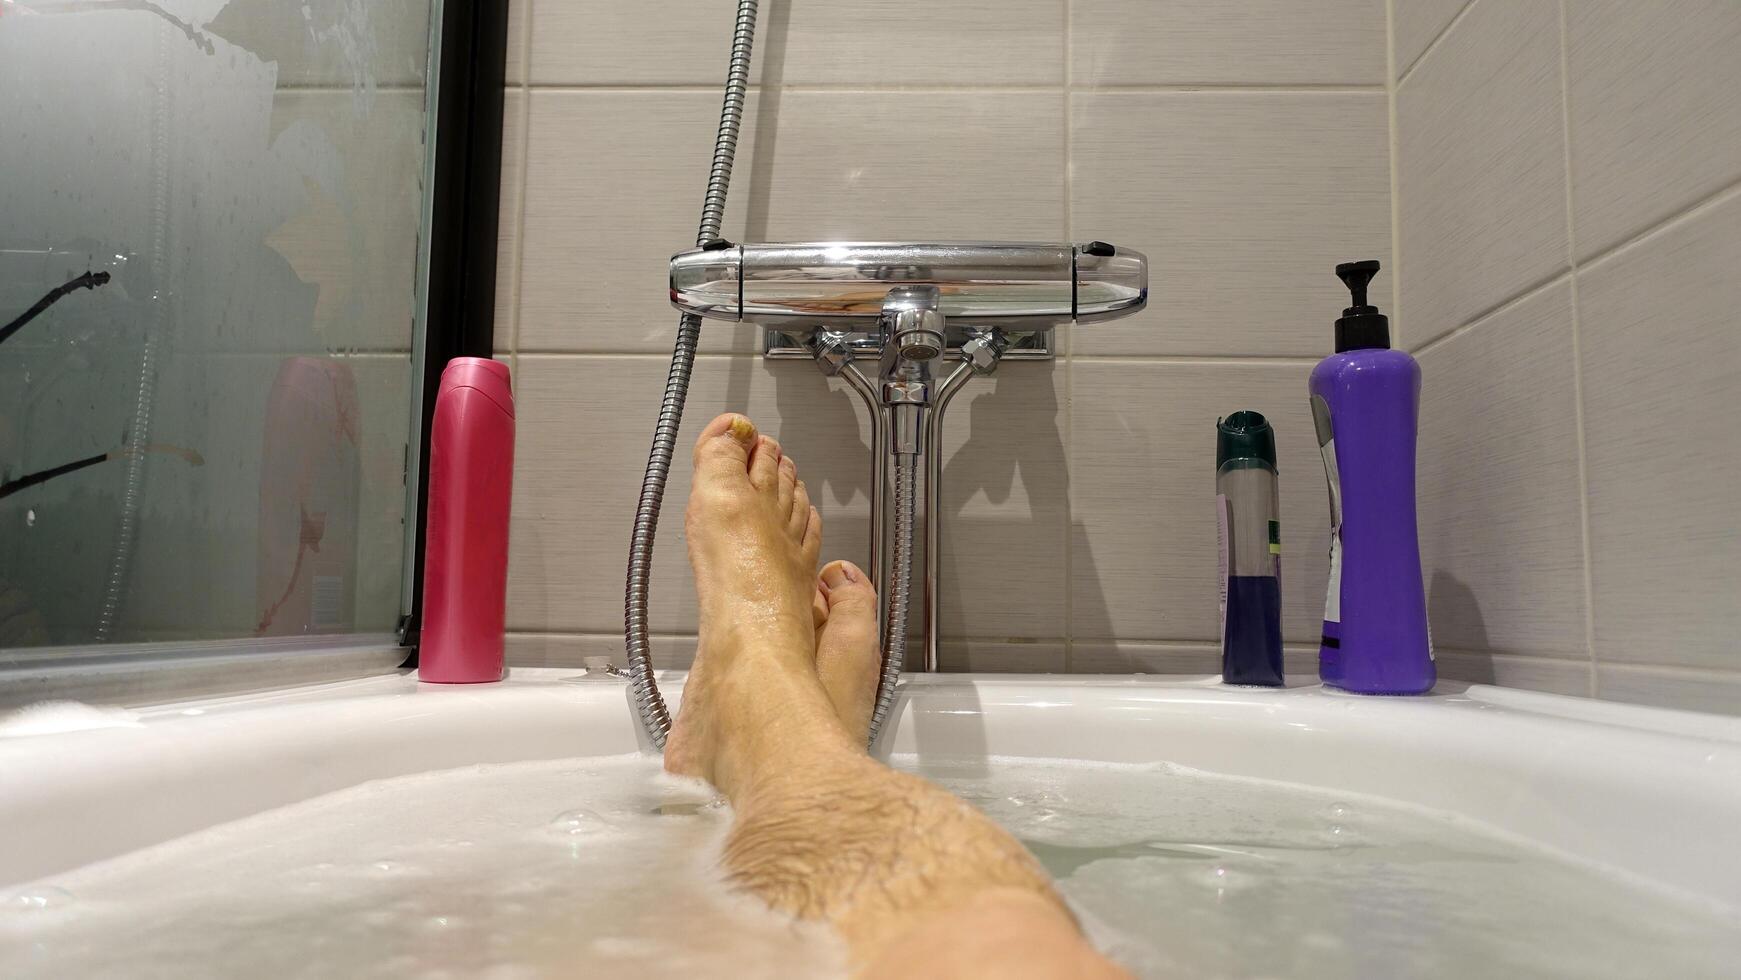 Feet sticking out of the water and soap suds during a hot bath photo